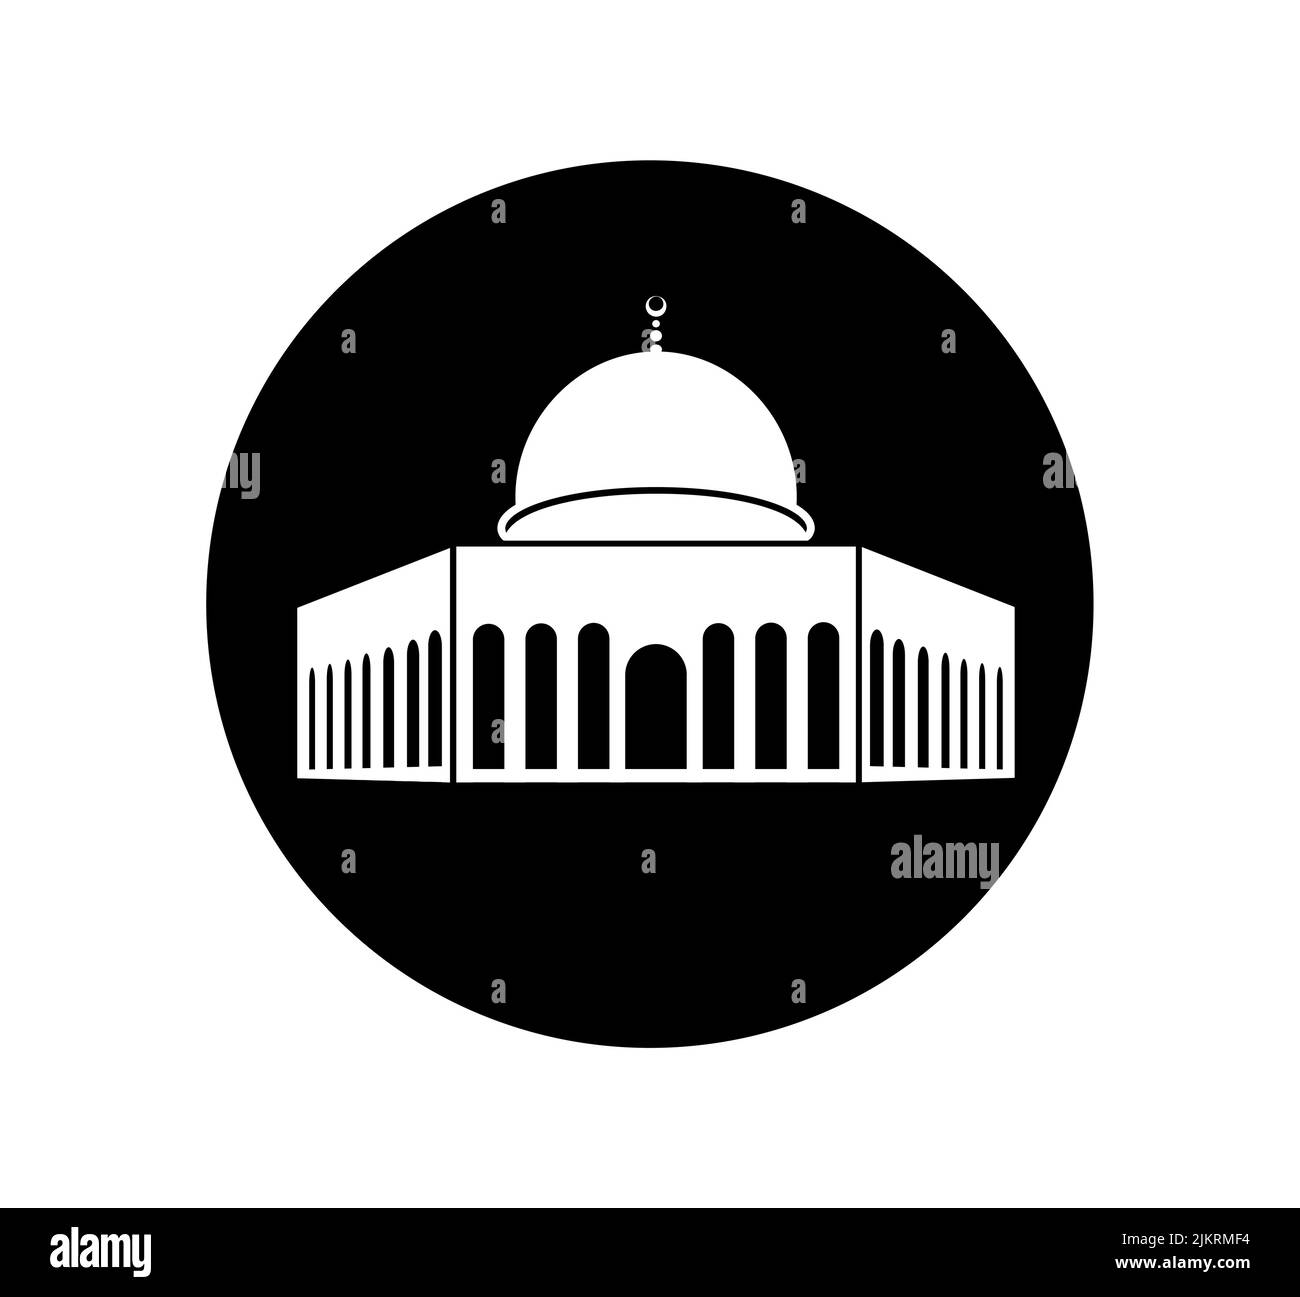 A minimal icon of the Al-Aqsa mosque in white on a dark gray background Stock Vector